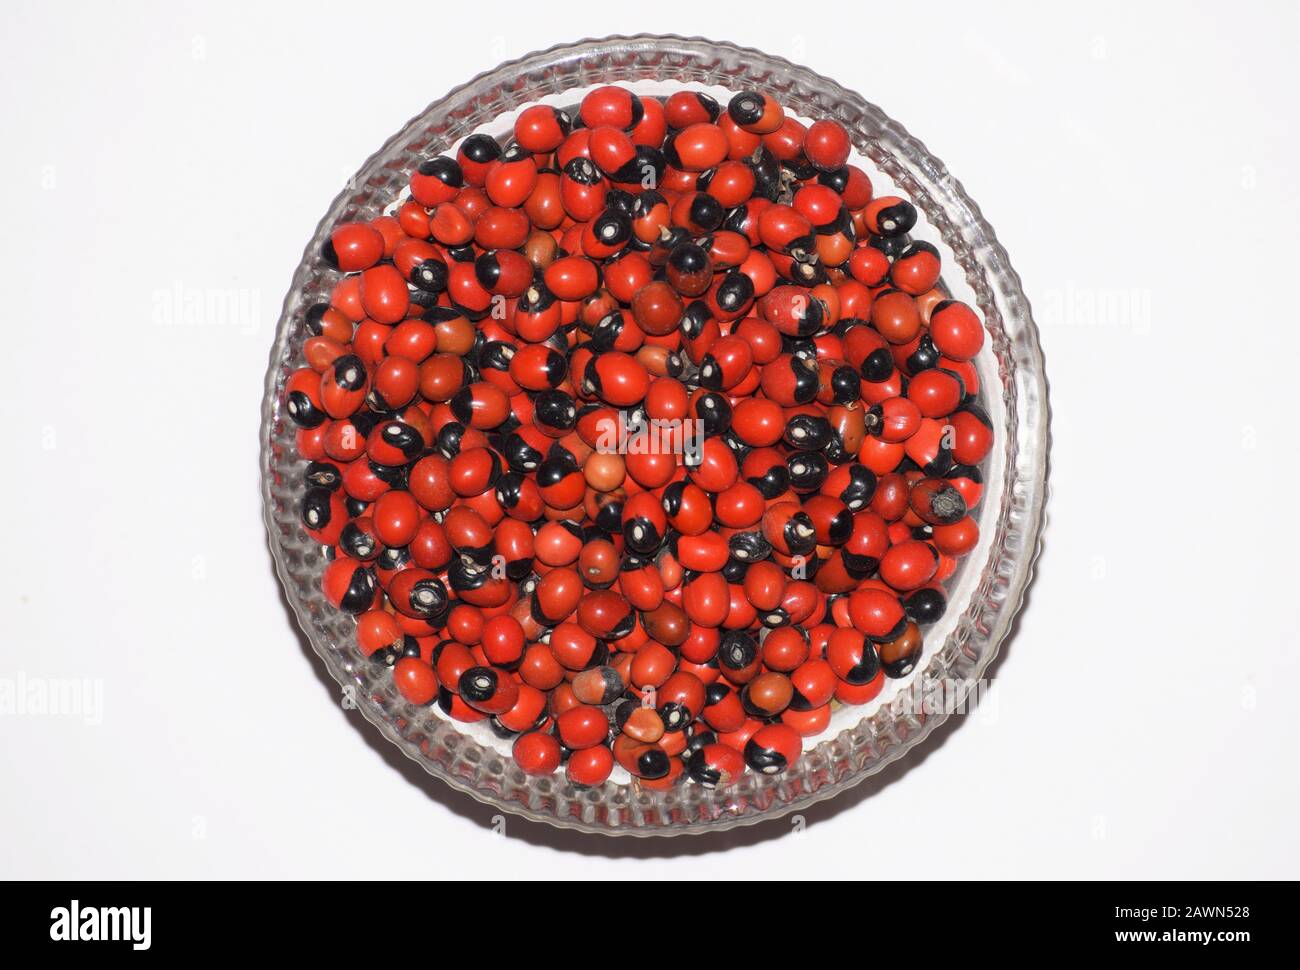 Rosary Pea or Abrus precatorius also known as Jequirity or prayer bean is herb flowering plant in the bean family. Dried hard red colored bean native Stock Photo